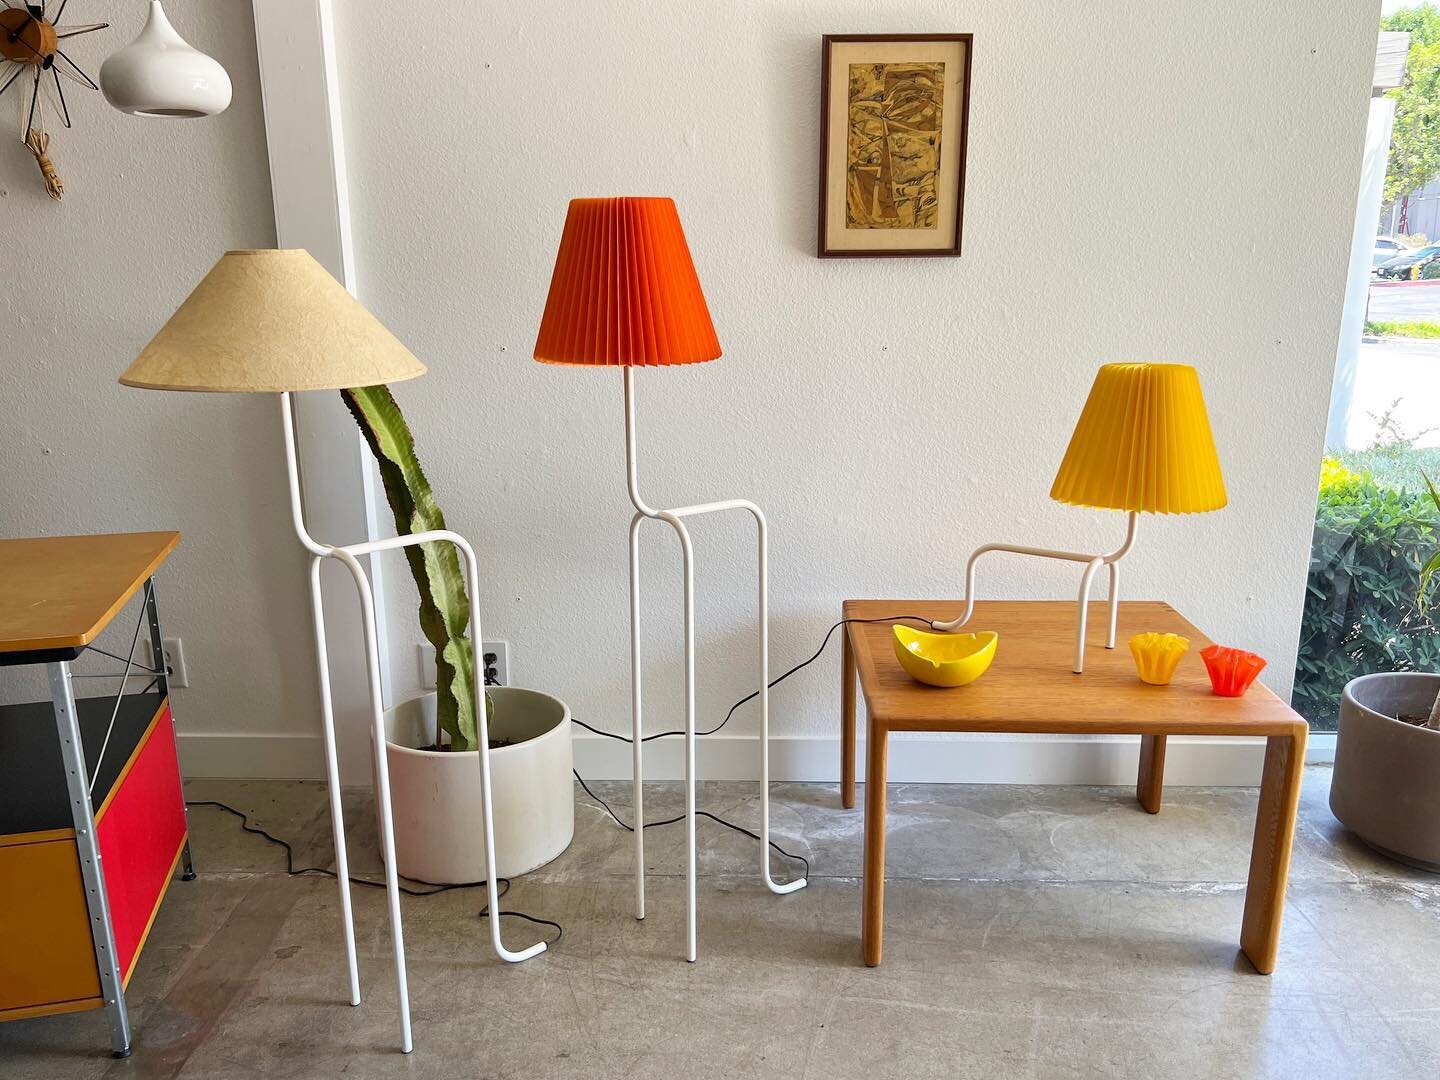 Lamps💡by David Design of Sweden. Designed and produced in the 90s. You could say these are a lamp version of a stack figure drawing you drew as a kid. We&rsquo;ve rewired each lamp and added two vintage new old stock danish pleated shades in orange 